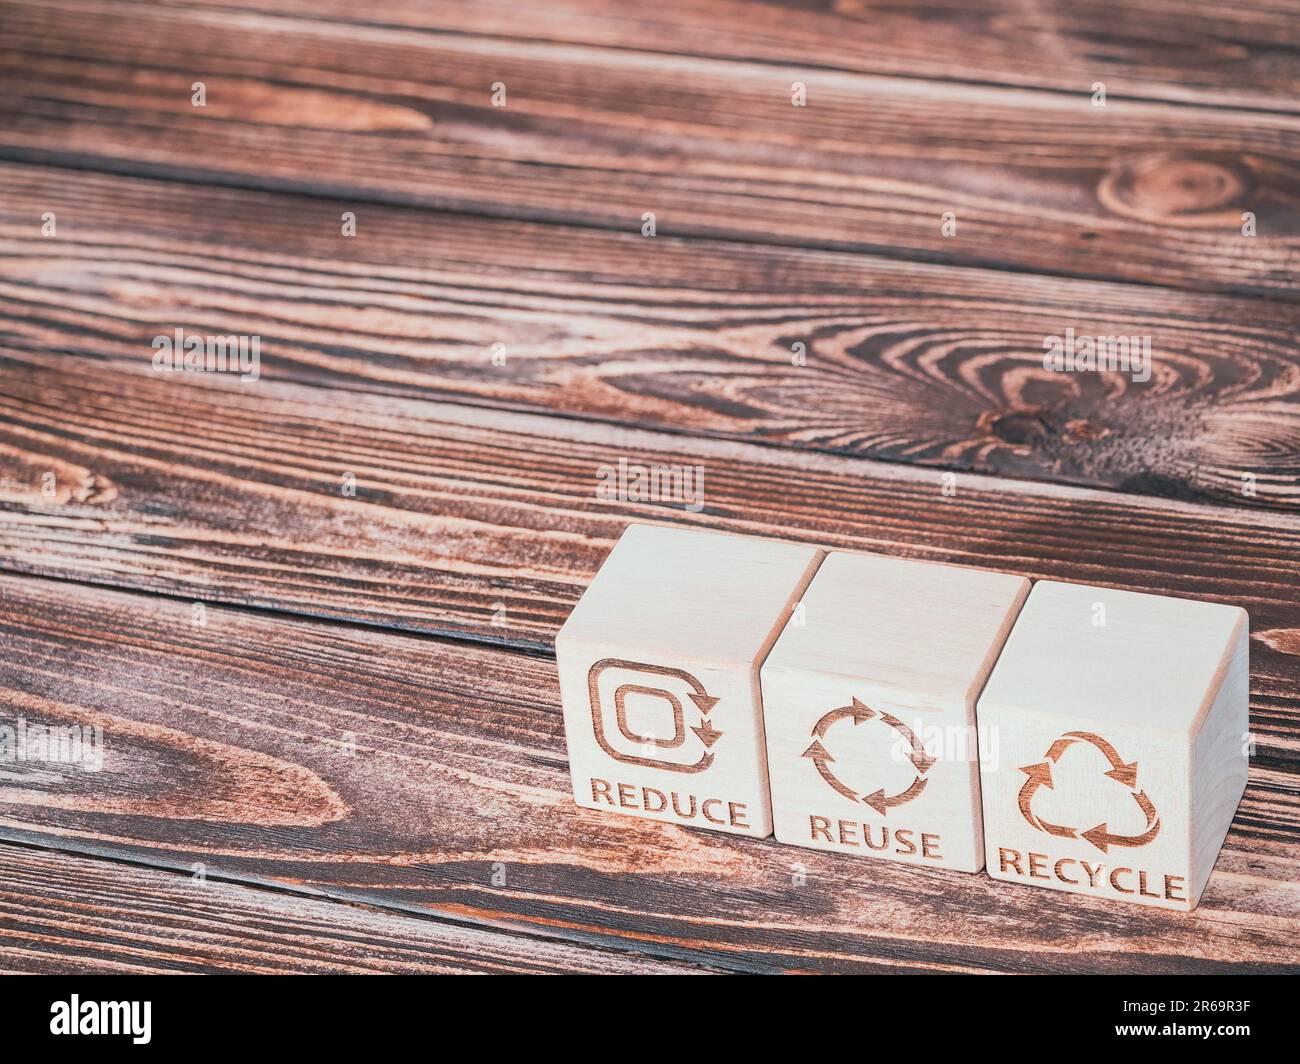 Reduce, Reuse, and Recycle symbols as a concept of resources conservation business strategy Stock Photo